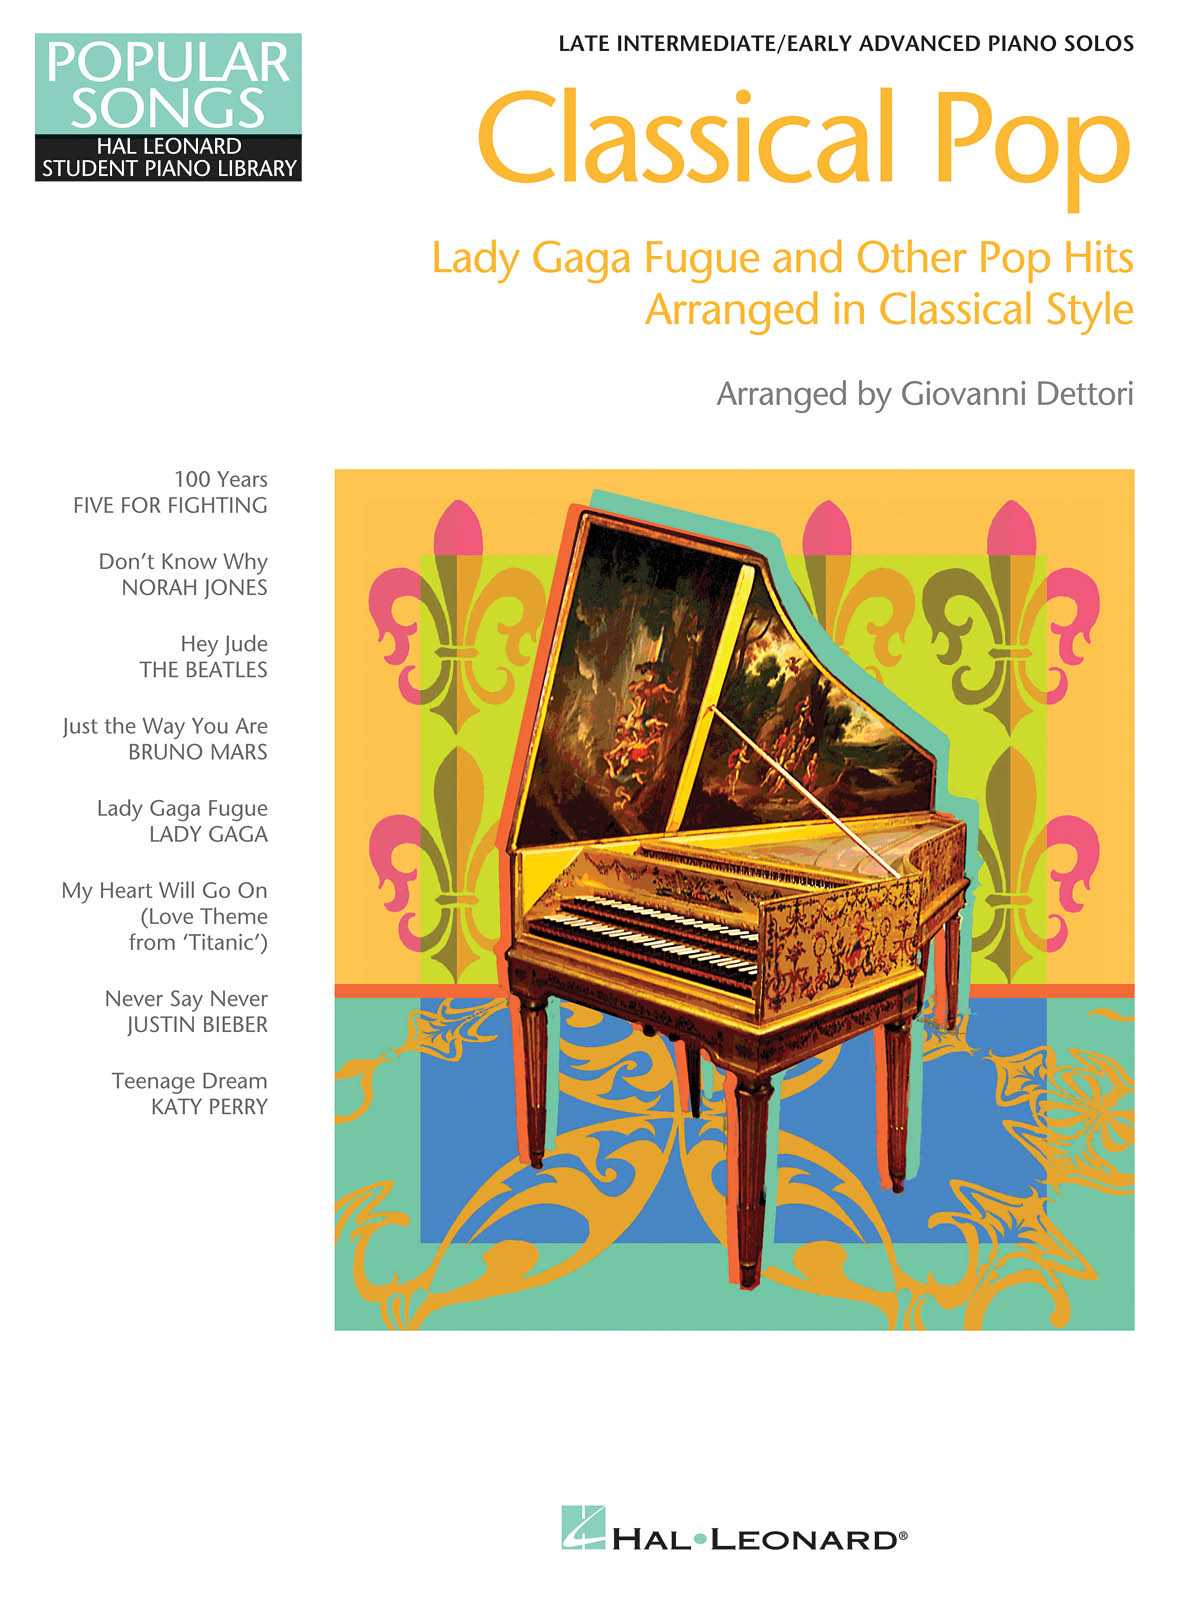 Classical Pop - Lady Gaga Fugue & Other Pop Hits Hal Leonard Student Piano Library - Pop Songs arranged in Classical Style